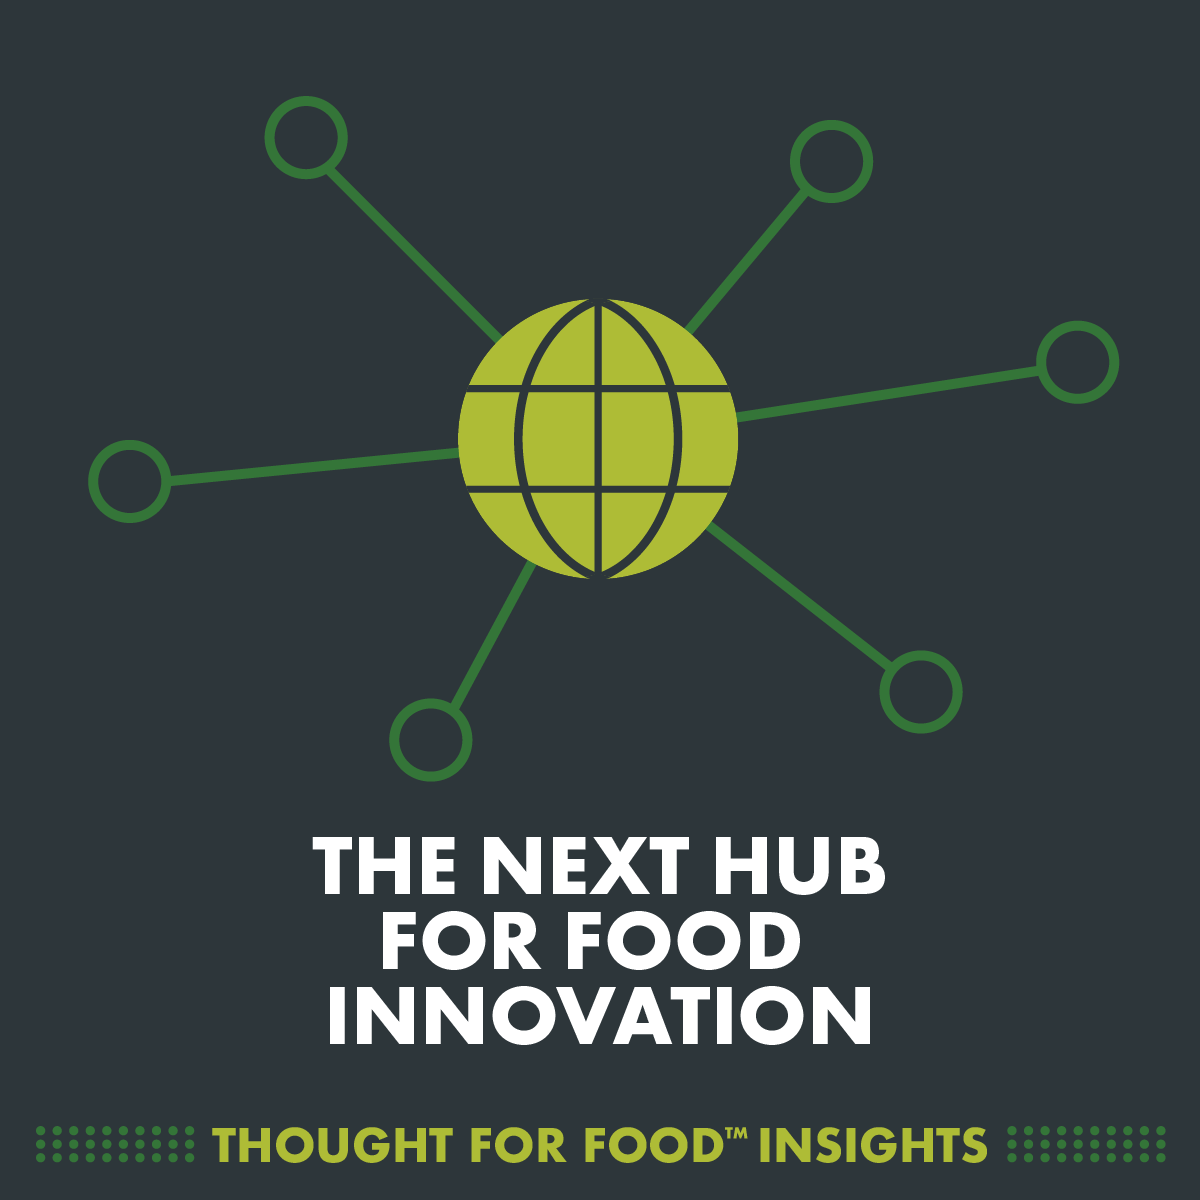 The Next Hub for Food Innovation